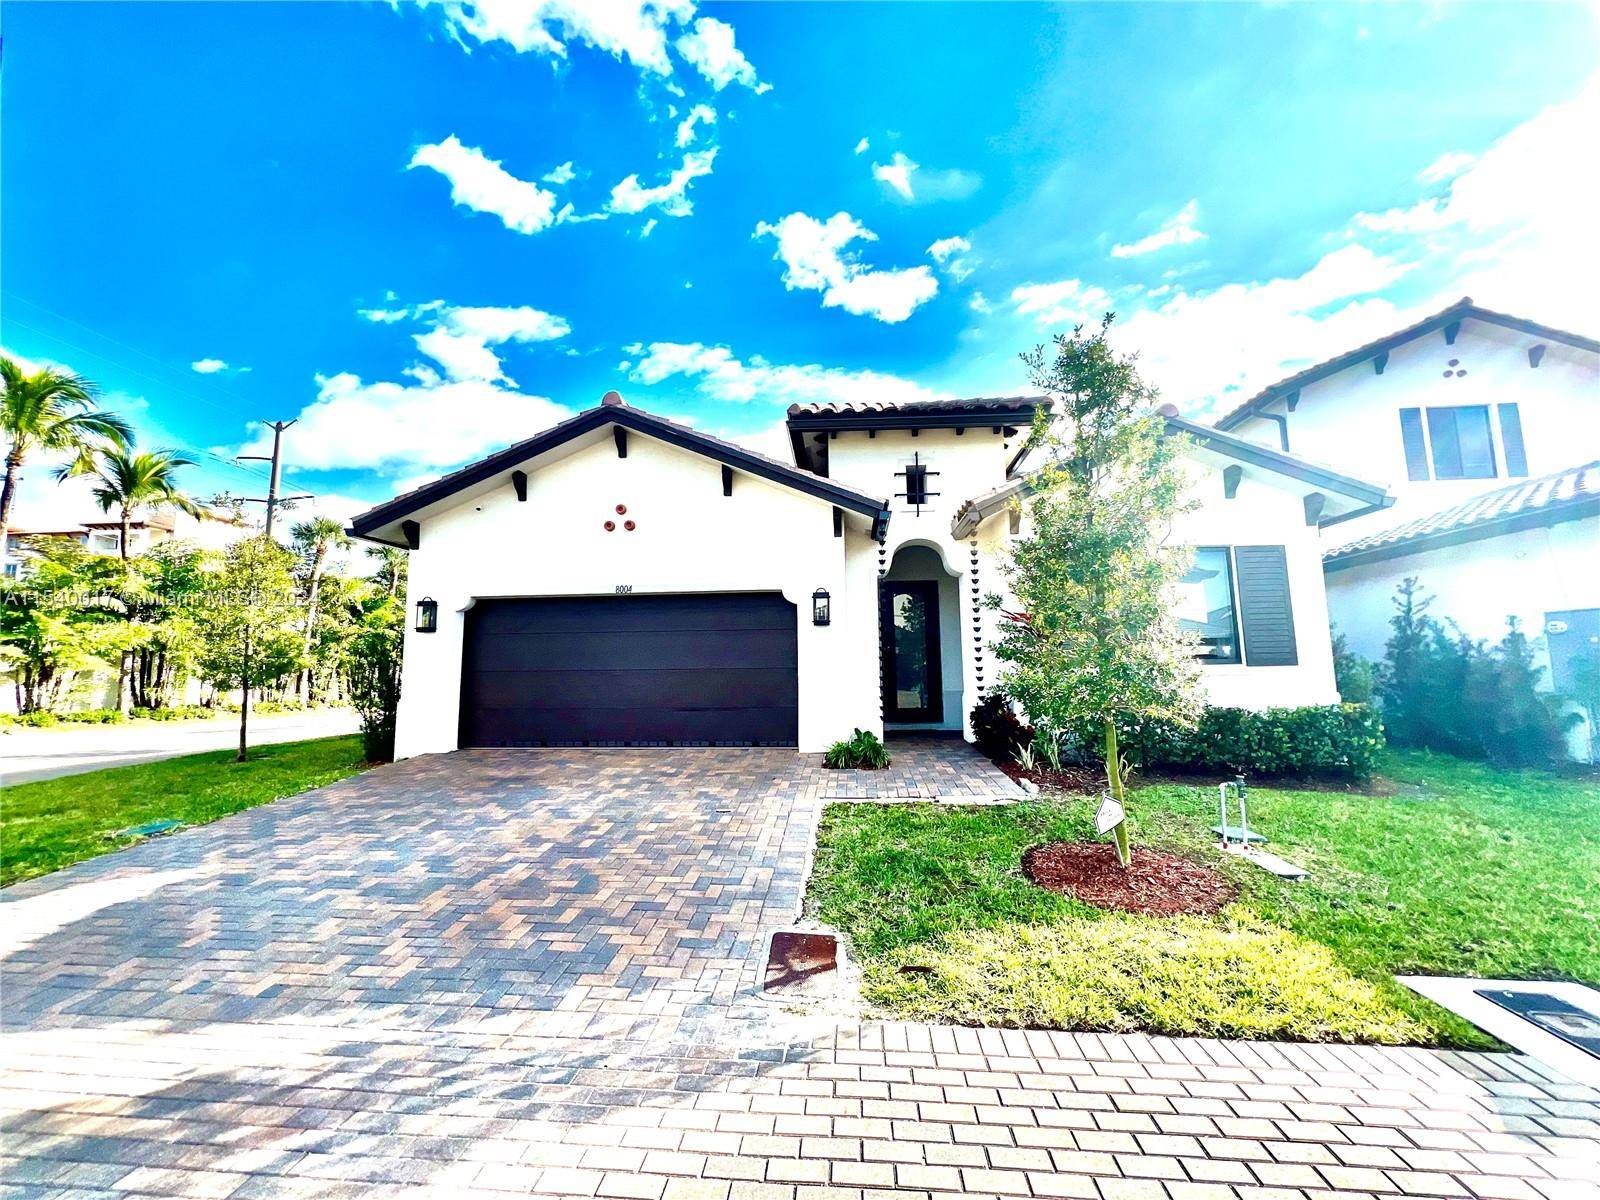 Beautifully furnished single family home at Canarias, Downtown Doral.